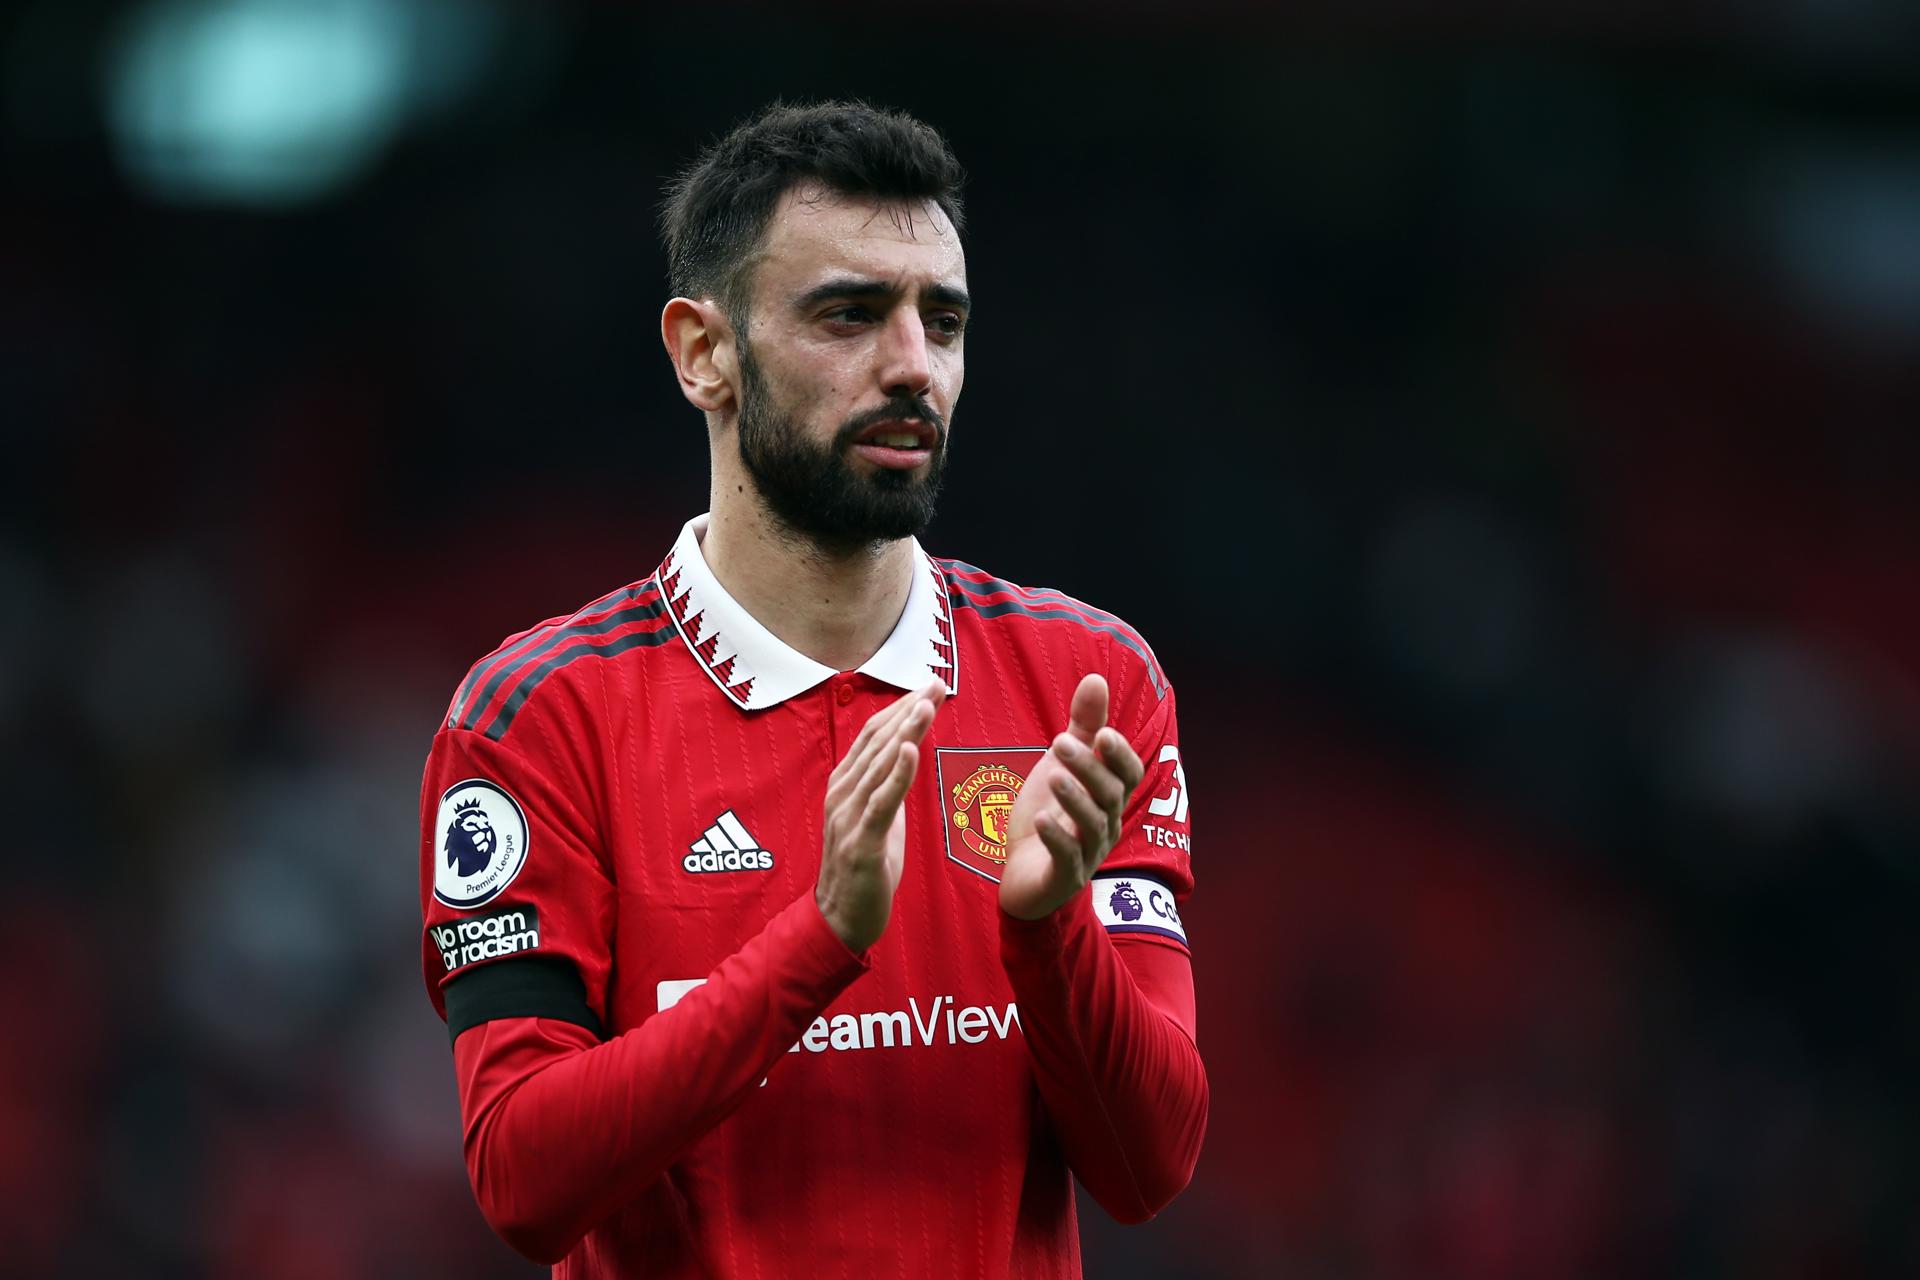 Manchester (United Kingdom), 12/03/2023.- Bruno Fernandes of Manchester United reacts after the English Premier League soccer match between Manchester United and Southampton in Manchester, Britain, 12 March 2023. EFE/EPA/Adam Vaughan EDITORIAL USE ONLY. No use with unauthorized audio, video, data, fixture lists, club/league logos or 'live' services. Online in-match use limited to 120 images, no video emulation. No use in betting, games or single club/league/player publications
